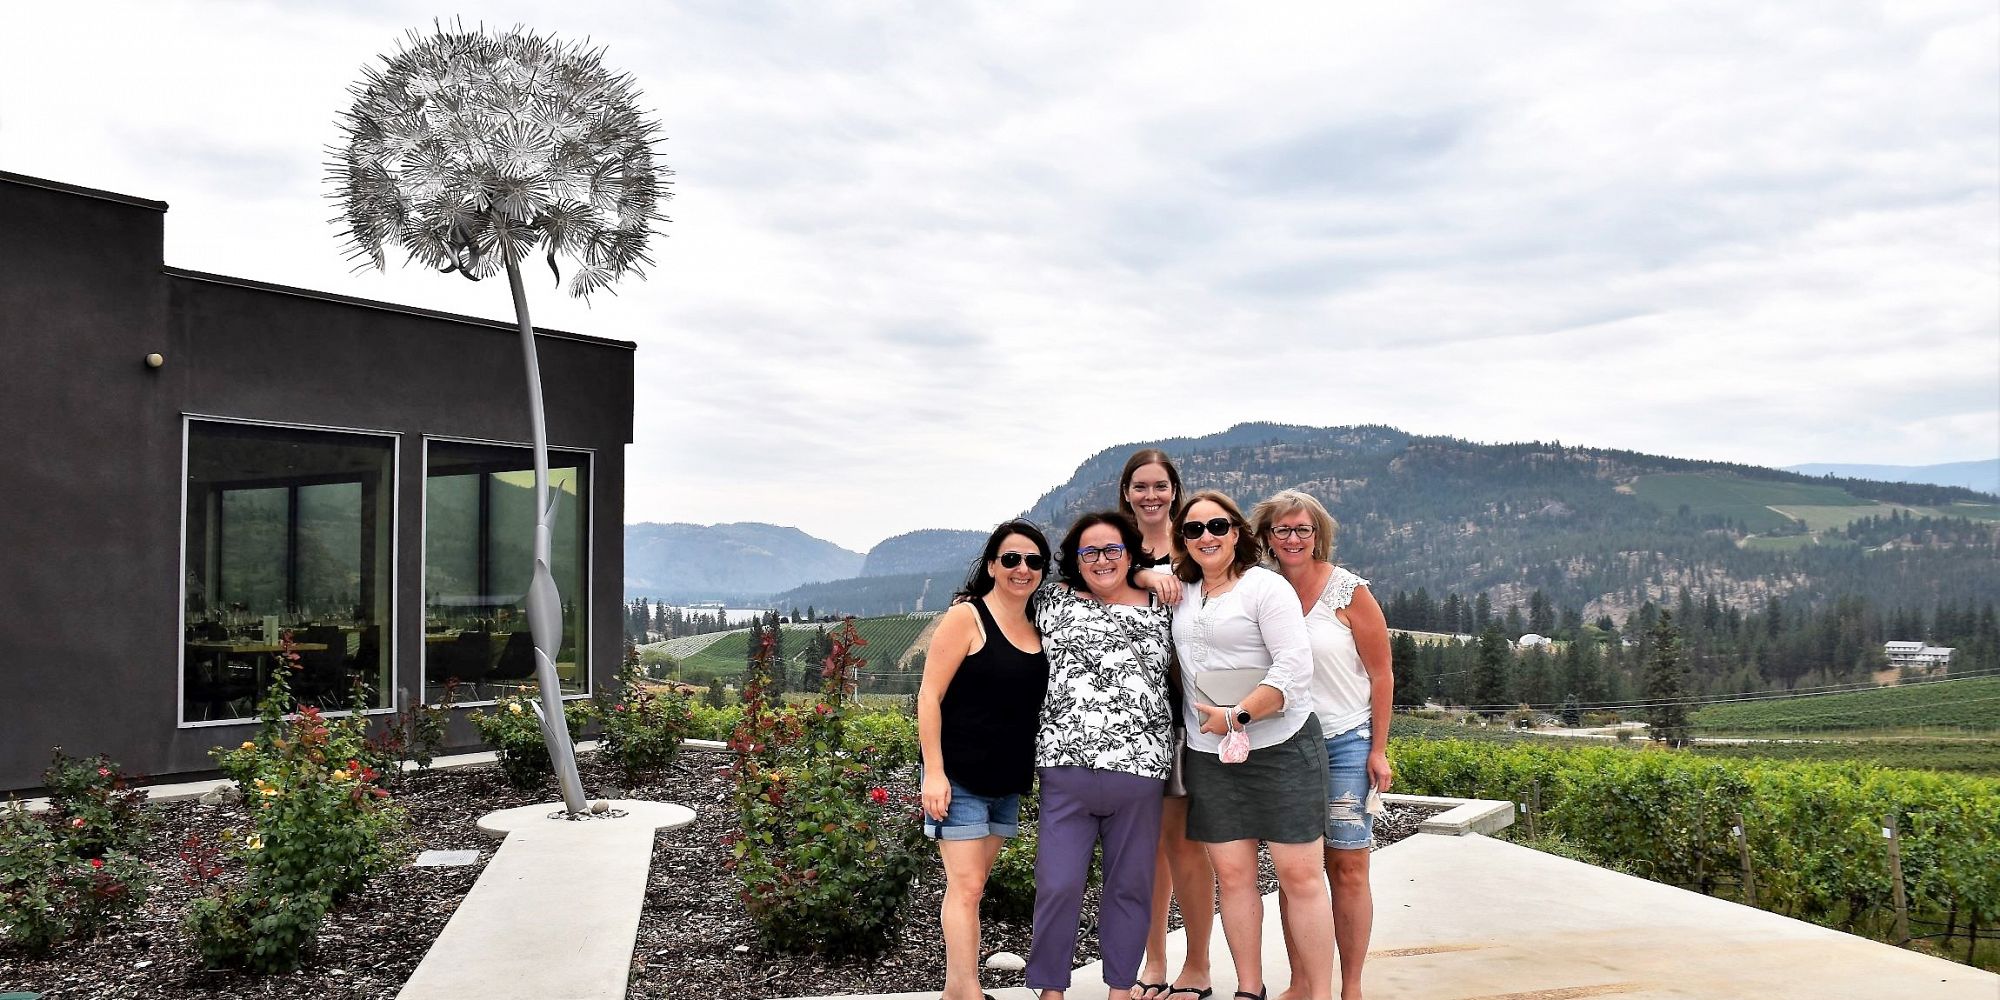 Five Ladies Overlooking Mountains And Vaseux Lake At Painted Rock Winery